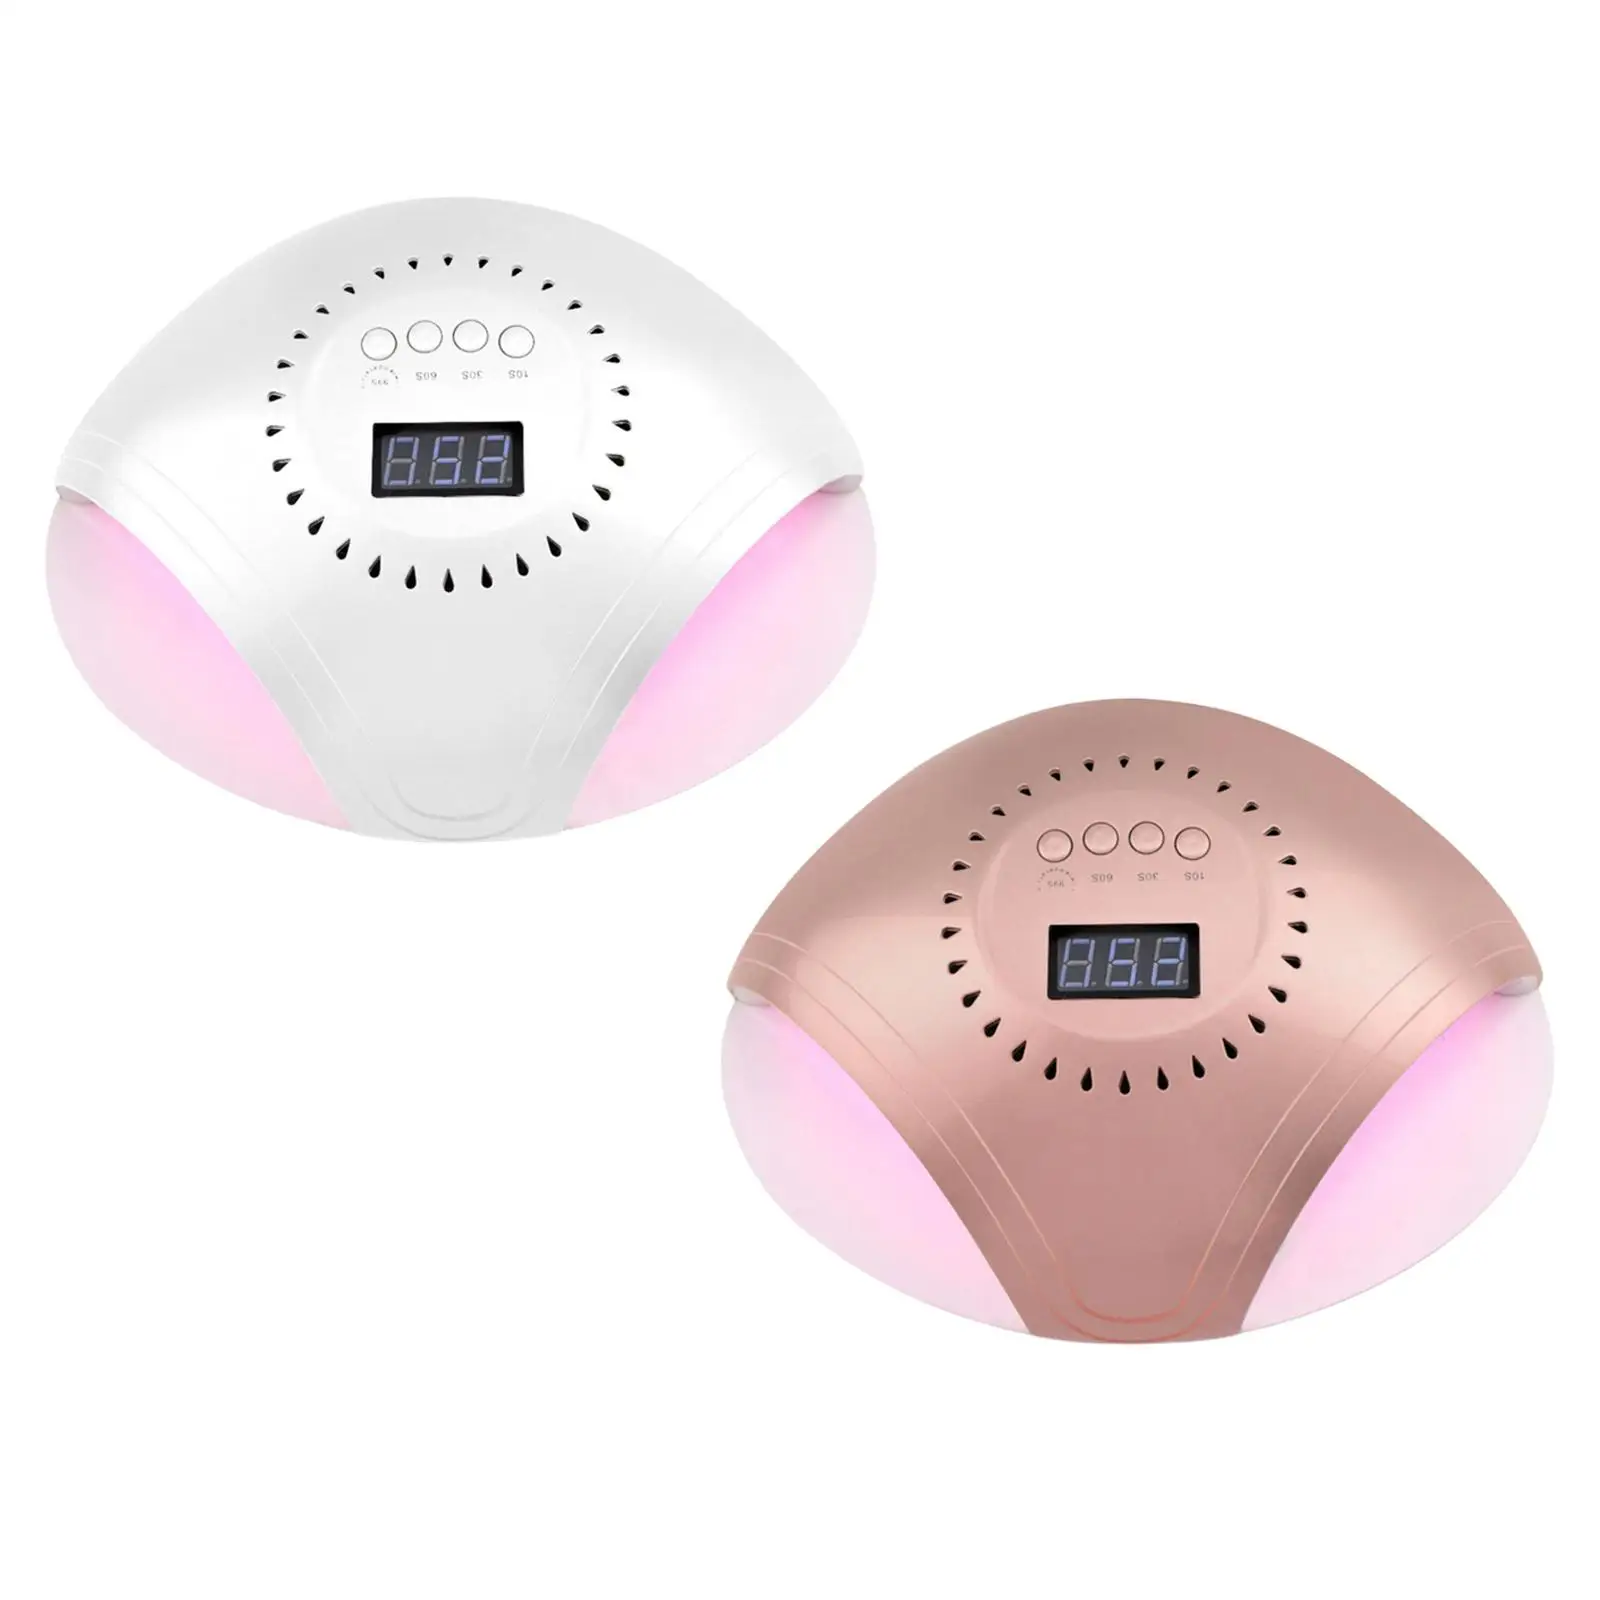 UV LED Nail Lamp Two Hands Auto-Sensor 86W Professional Larger Space Gel Lamp UV Light for Manicure Foot Drying Nails Girl Woman